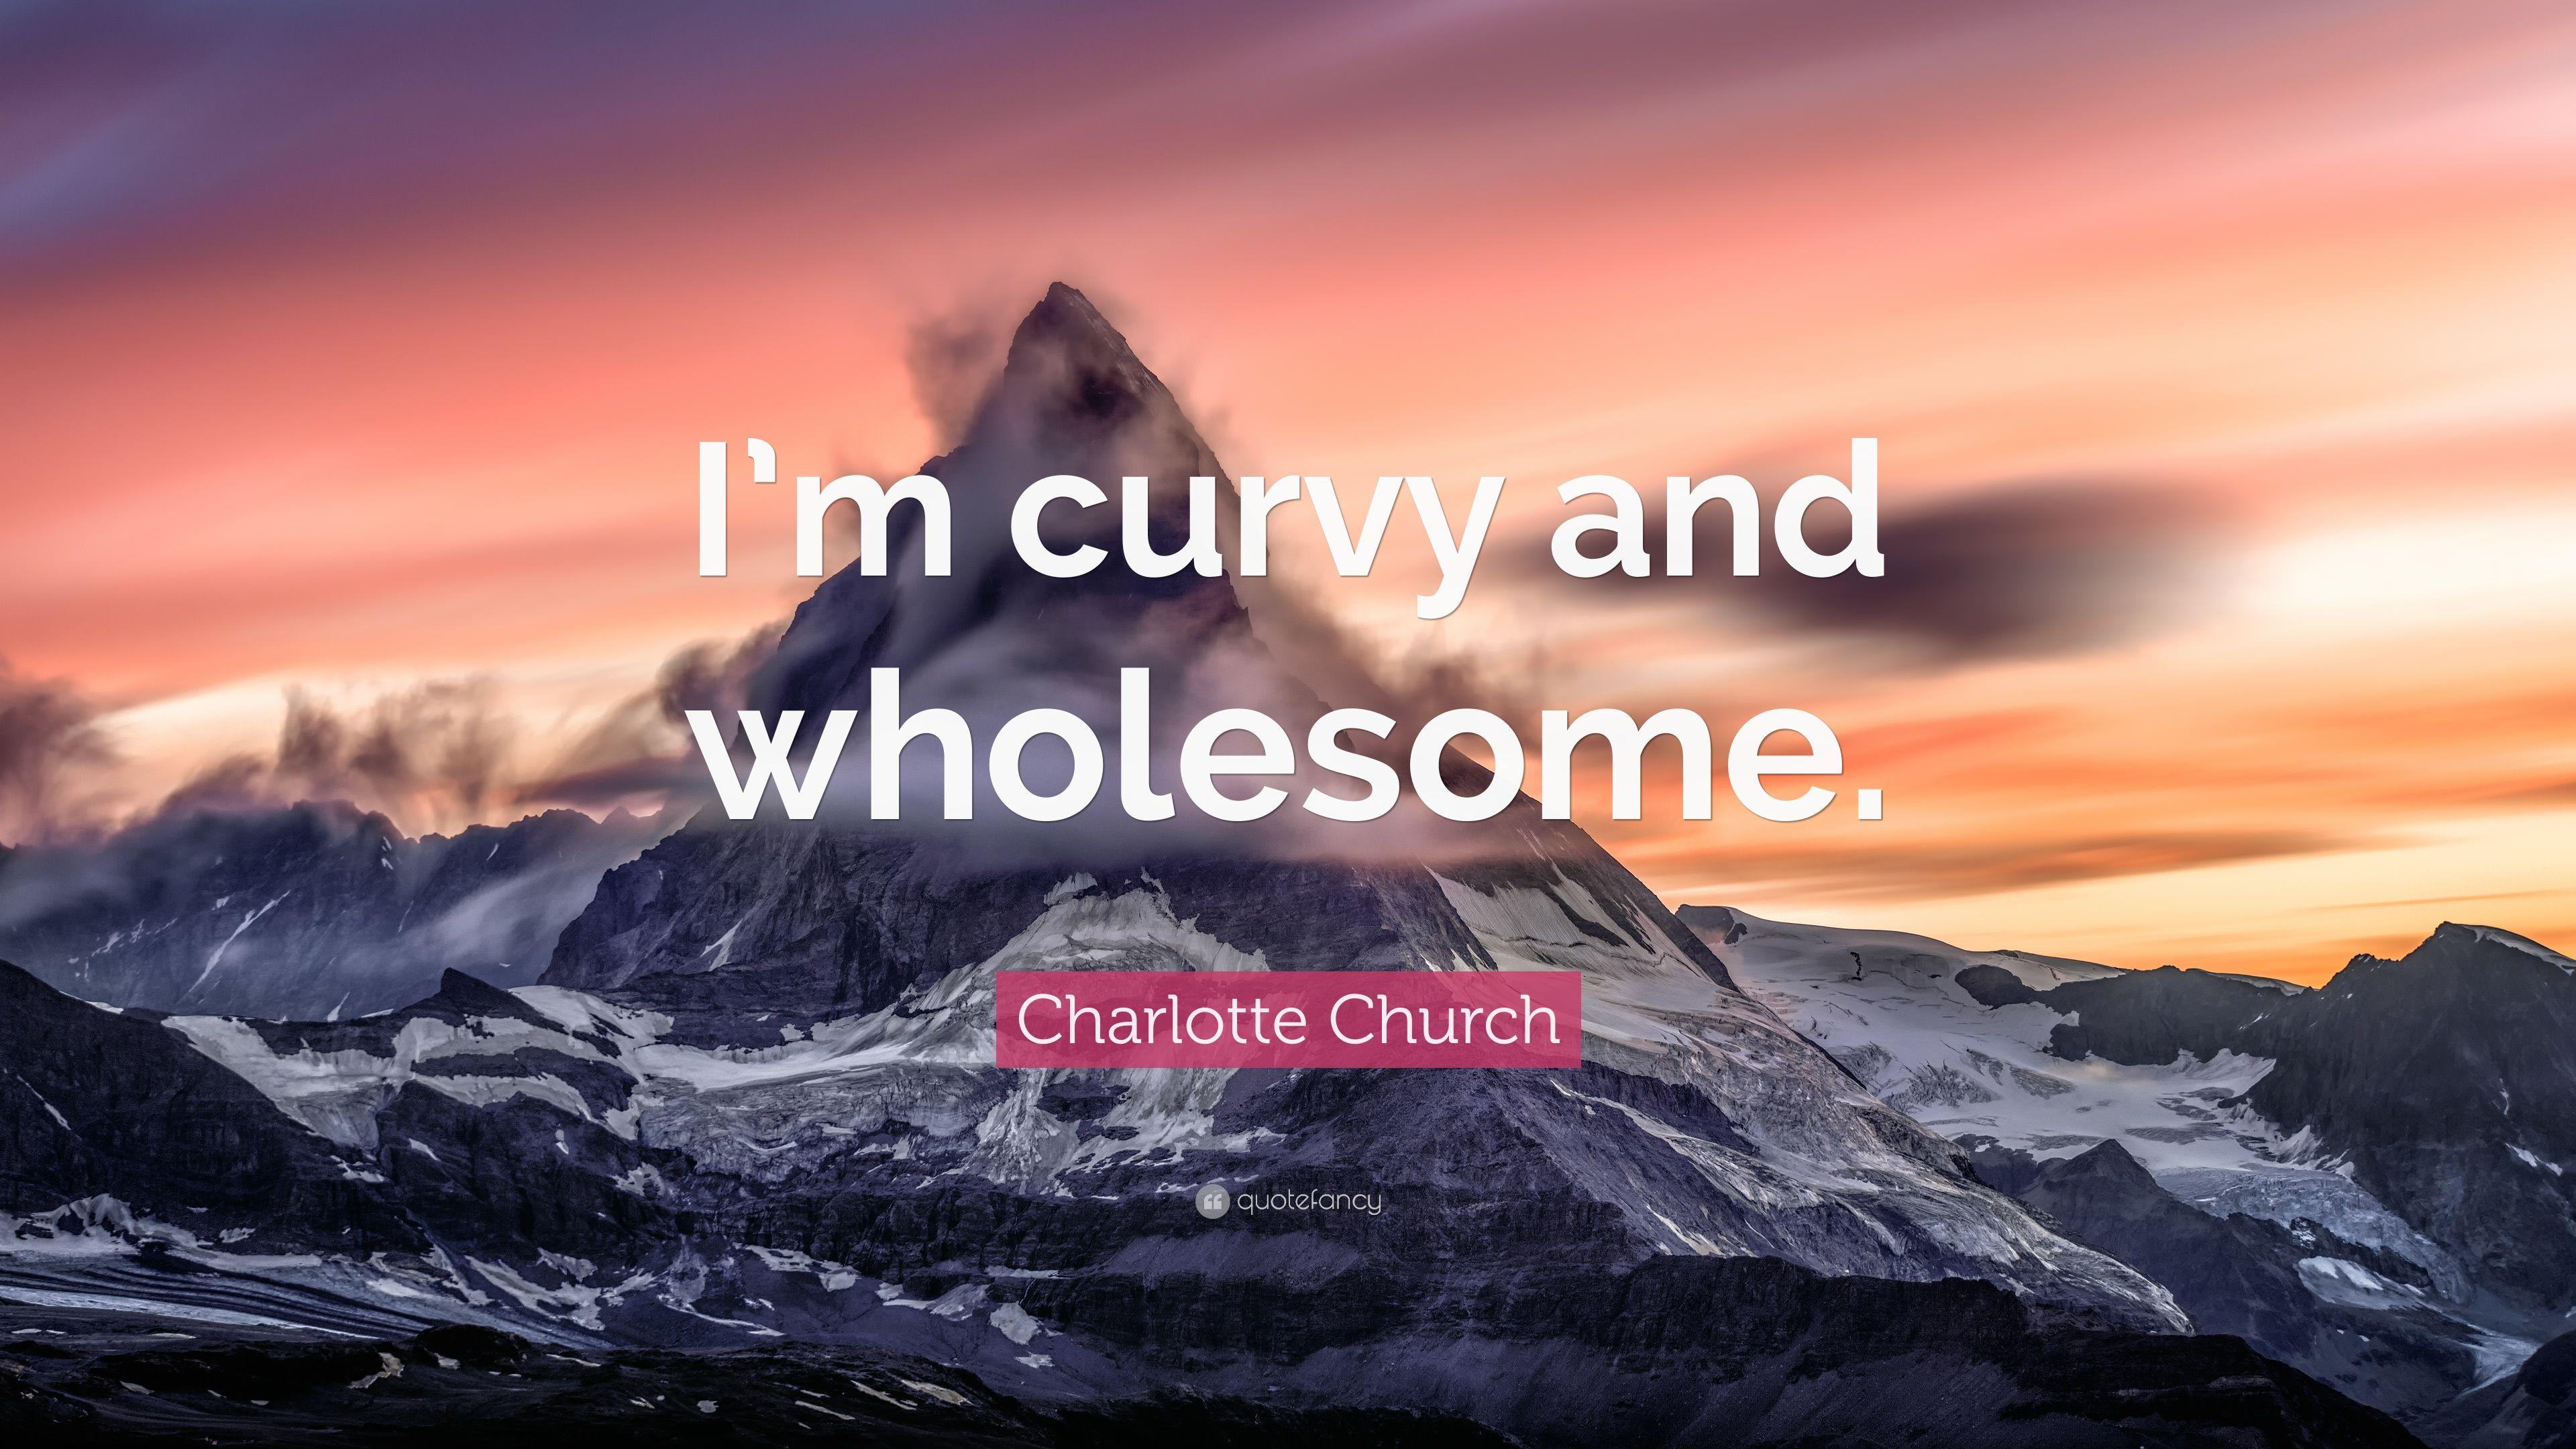 Charlotte Church Quote: “I'm curvy and wholesome.” 7